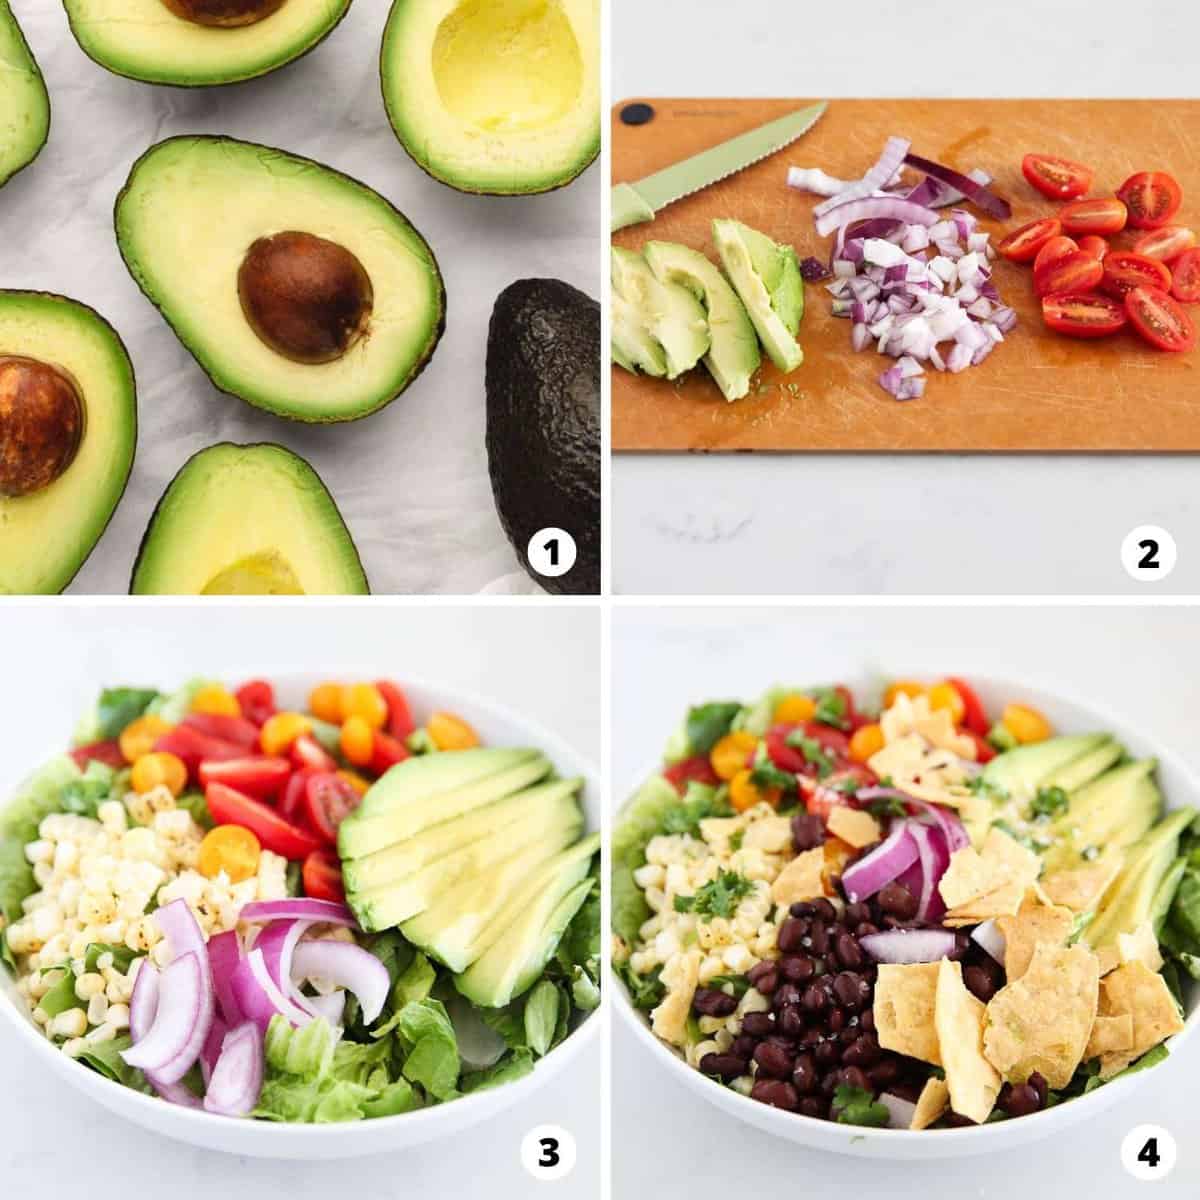 Step by step showing how to make Mexican salad.